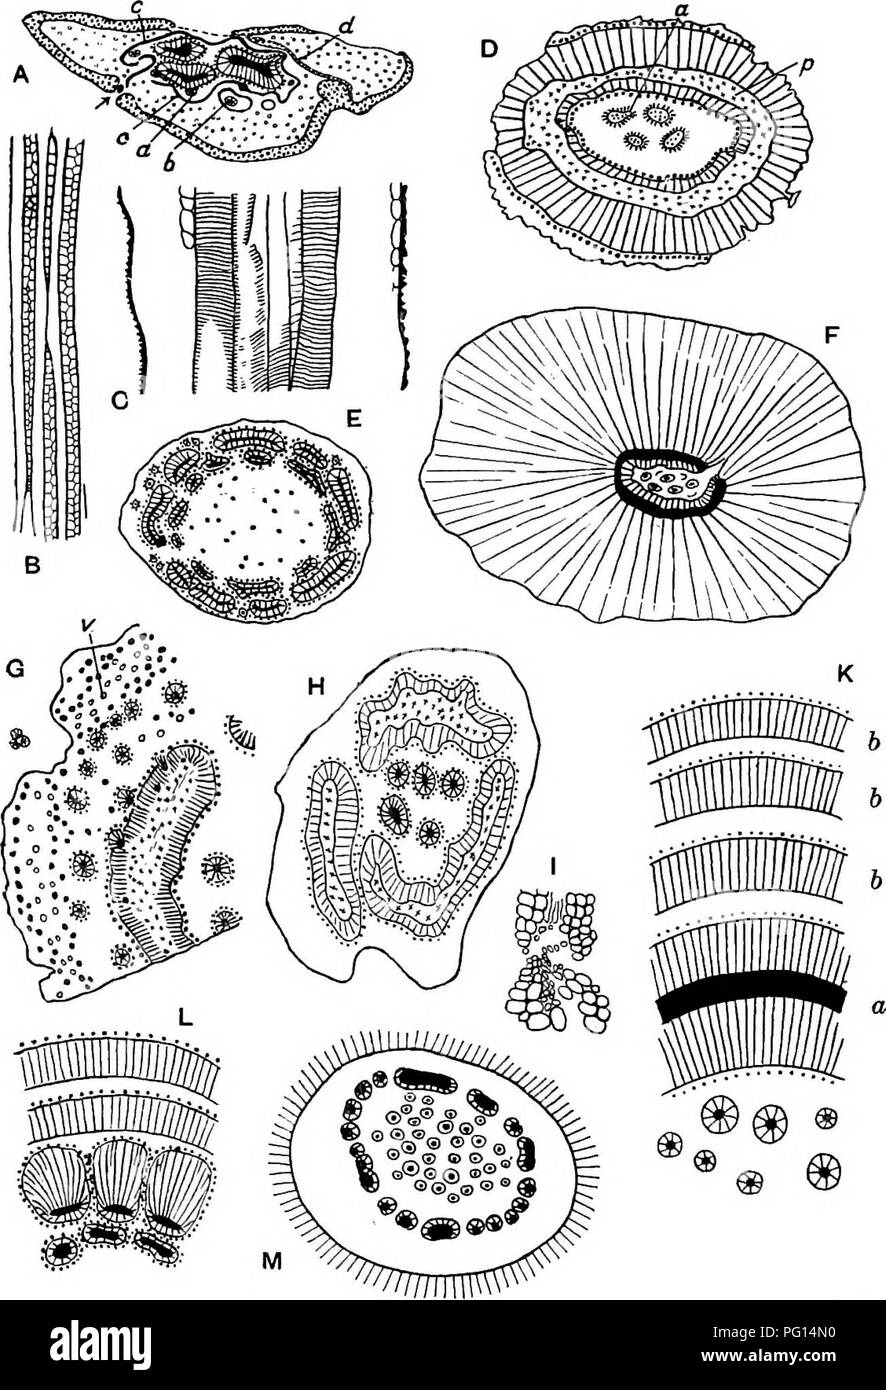 . Fossil plants : for students of botany and geology . Paleobotany. &quot;Fid. 416. Medullosa stems. A—C, Medullosa anglica; A, transverse section; a, accessory vascular strand; b, accessory strand enclosed by periderm; c, band of periderm encircling steles; d, solerenchyma between leaf and stem. B and C, longitudinal sections. (After Scott.) D, Medullosa stellata; a, star- rings; p, 'partial pith.' (After Weber and Sterzel.) E, Medullosa Solmsi. (After Weber and Sterzel.) F, Medullosa stellata, from a specimen in the British Museum (No. 13767). G, Medullosa stellata var. cortica; «, leaf-bund Stock Photo